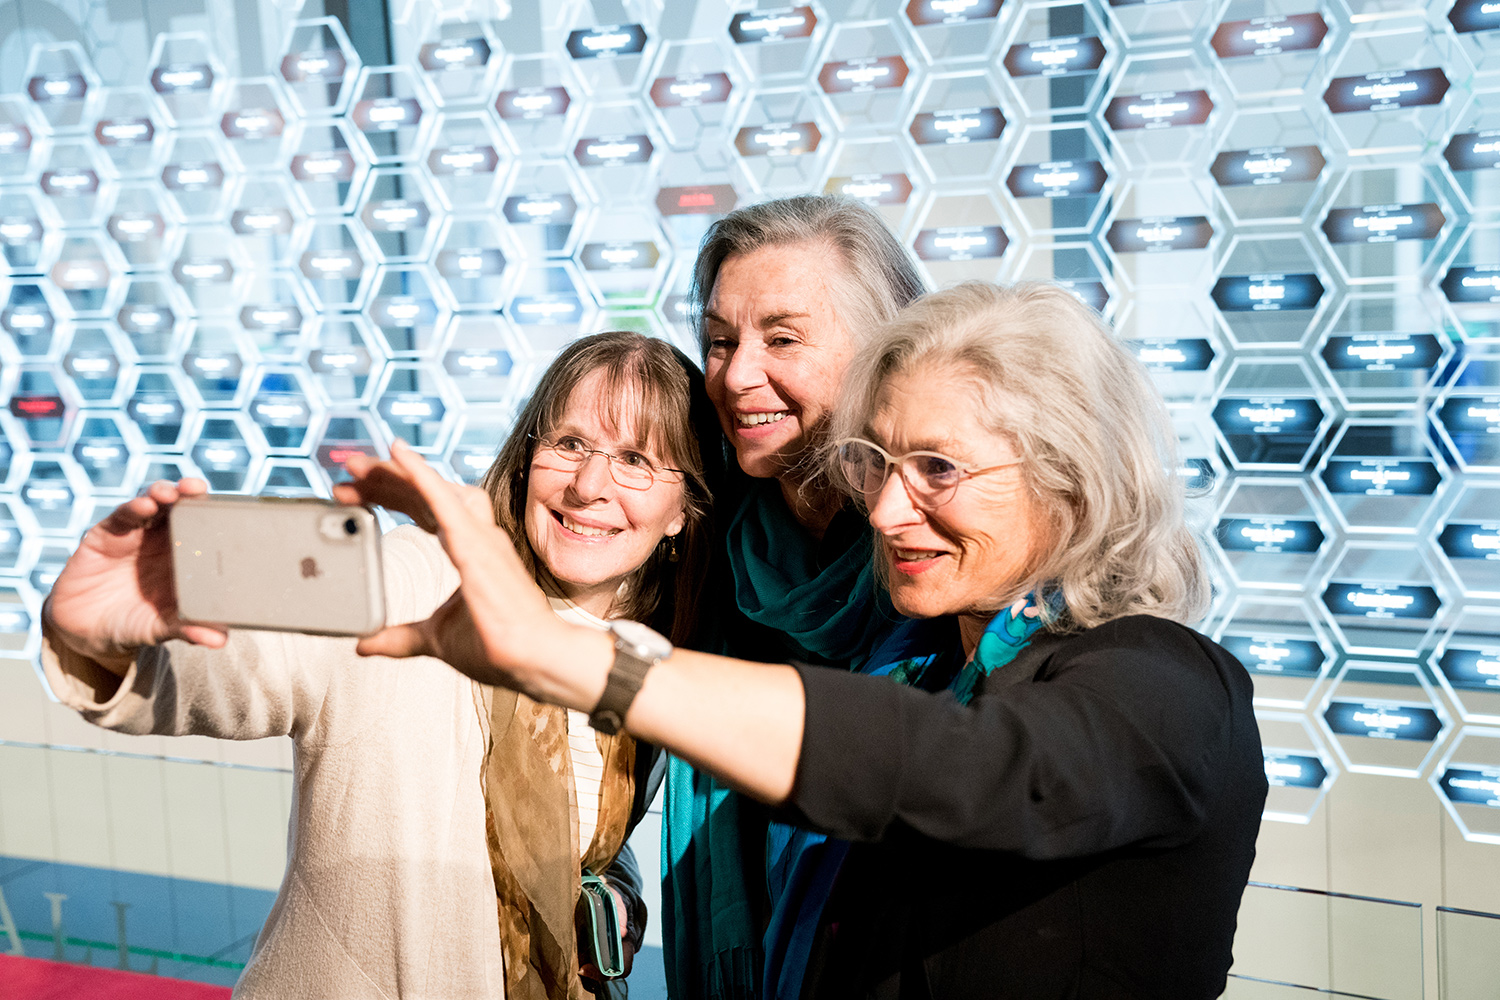 Picture of Polly Smith, Lisa Lindahl, and Hind Miller taking a selfie together.